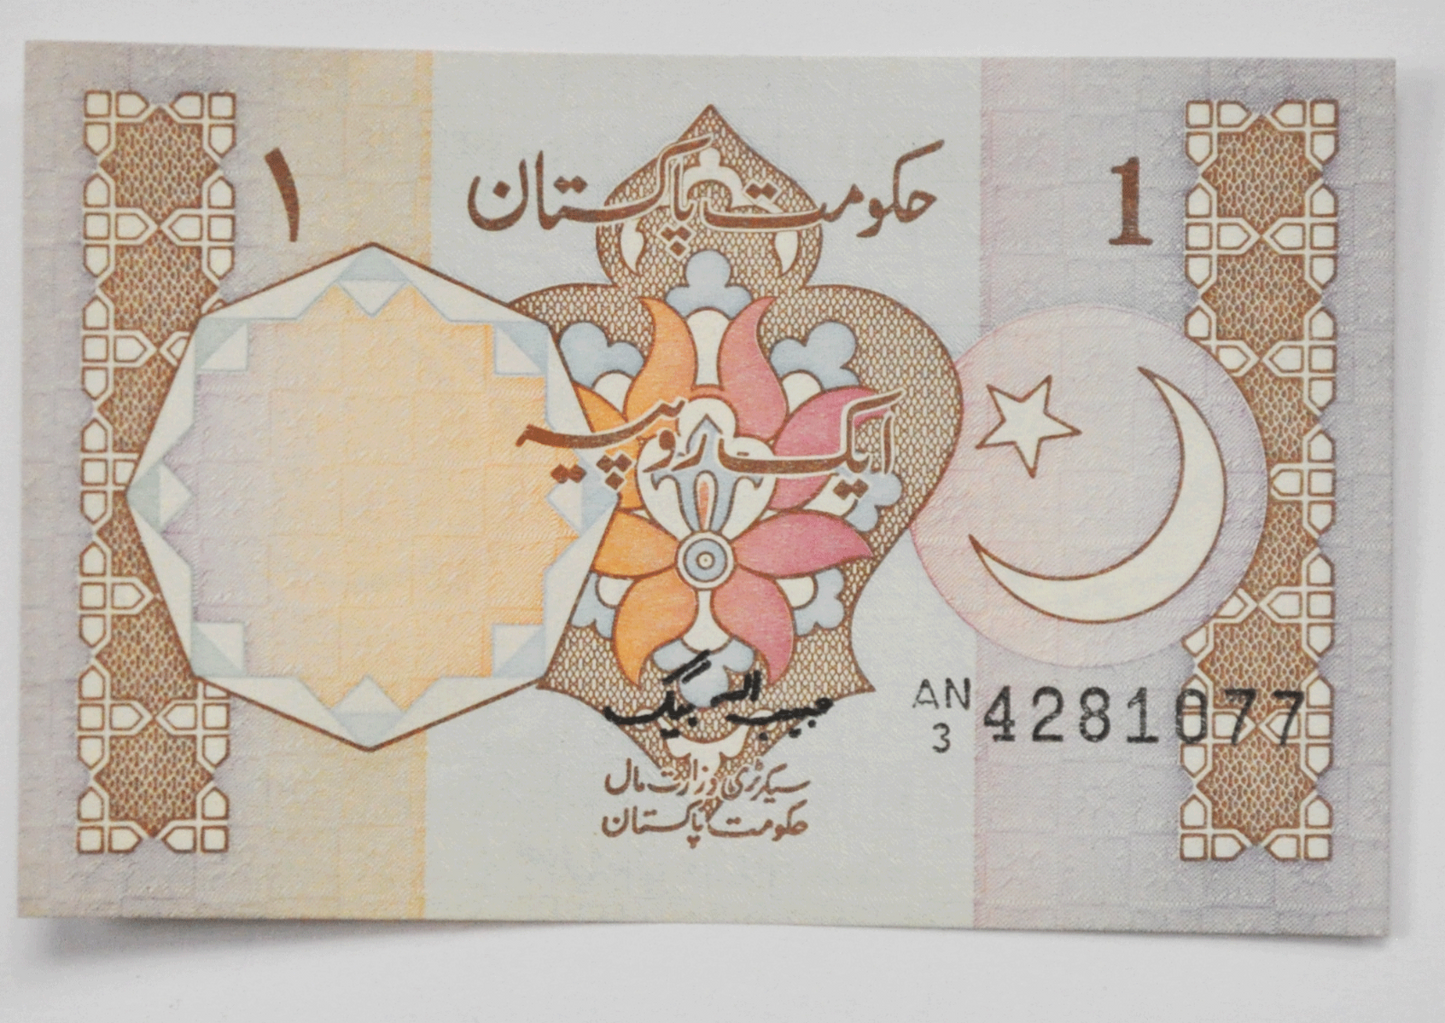 ND Pakistan One 1 Rupee Note Uncirculated Currency